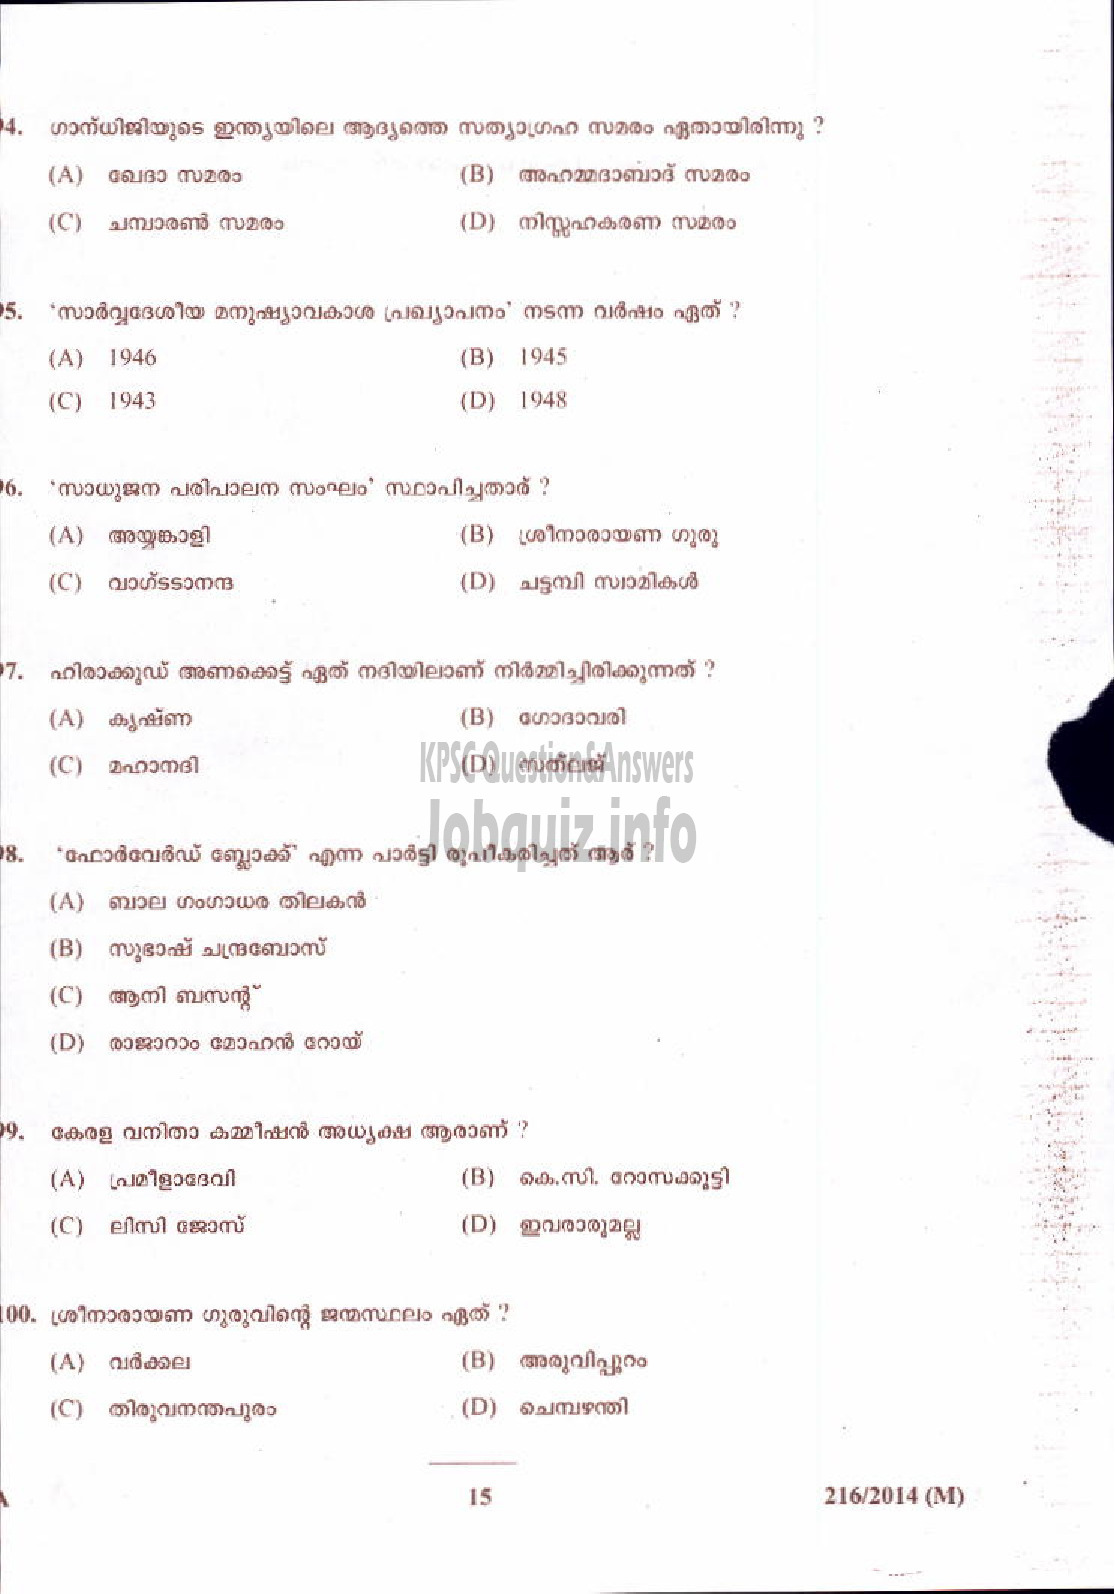 Kerala PSC Question Paper - FITTER AGRICULTURE-15